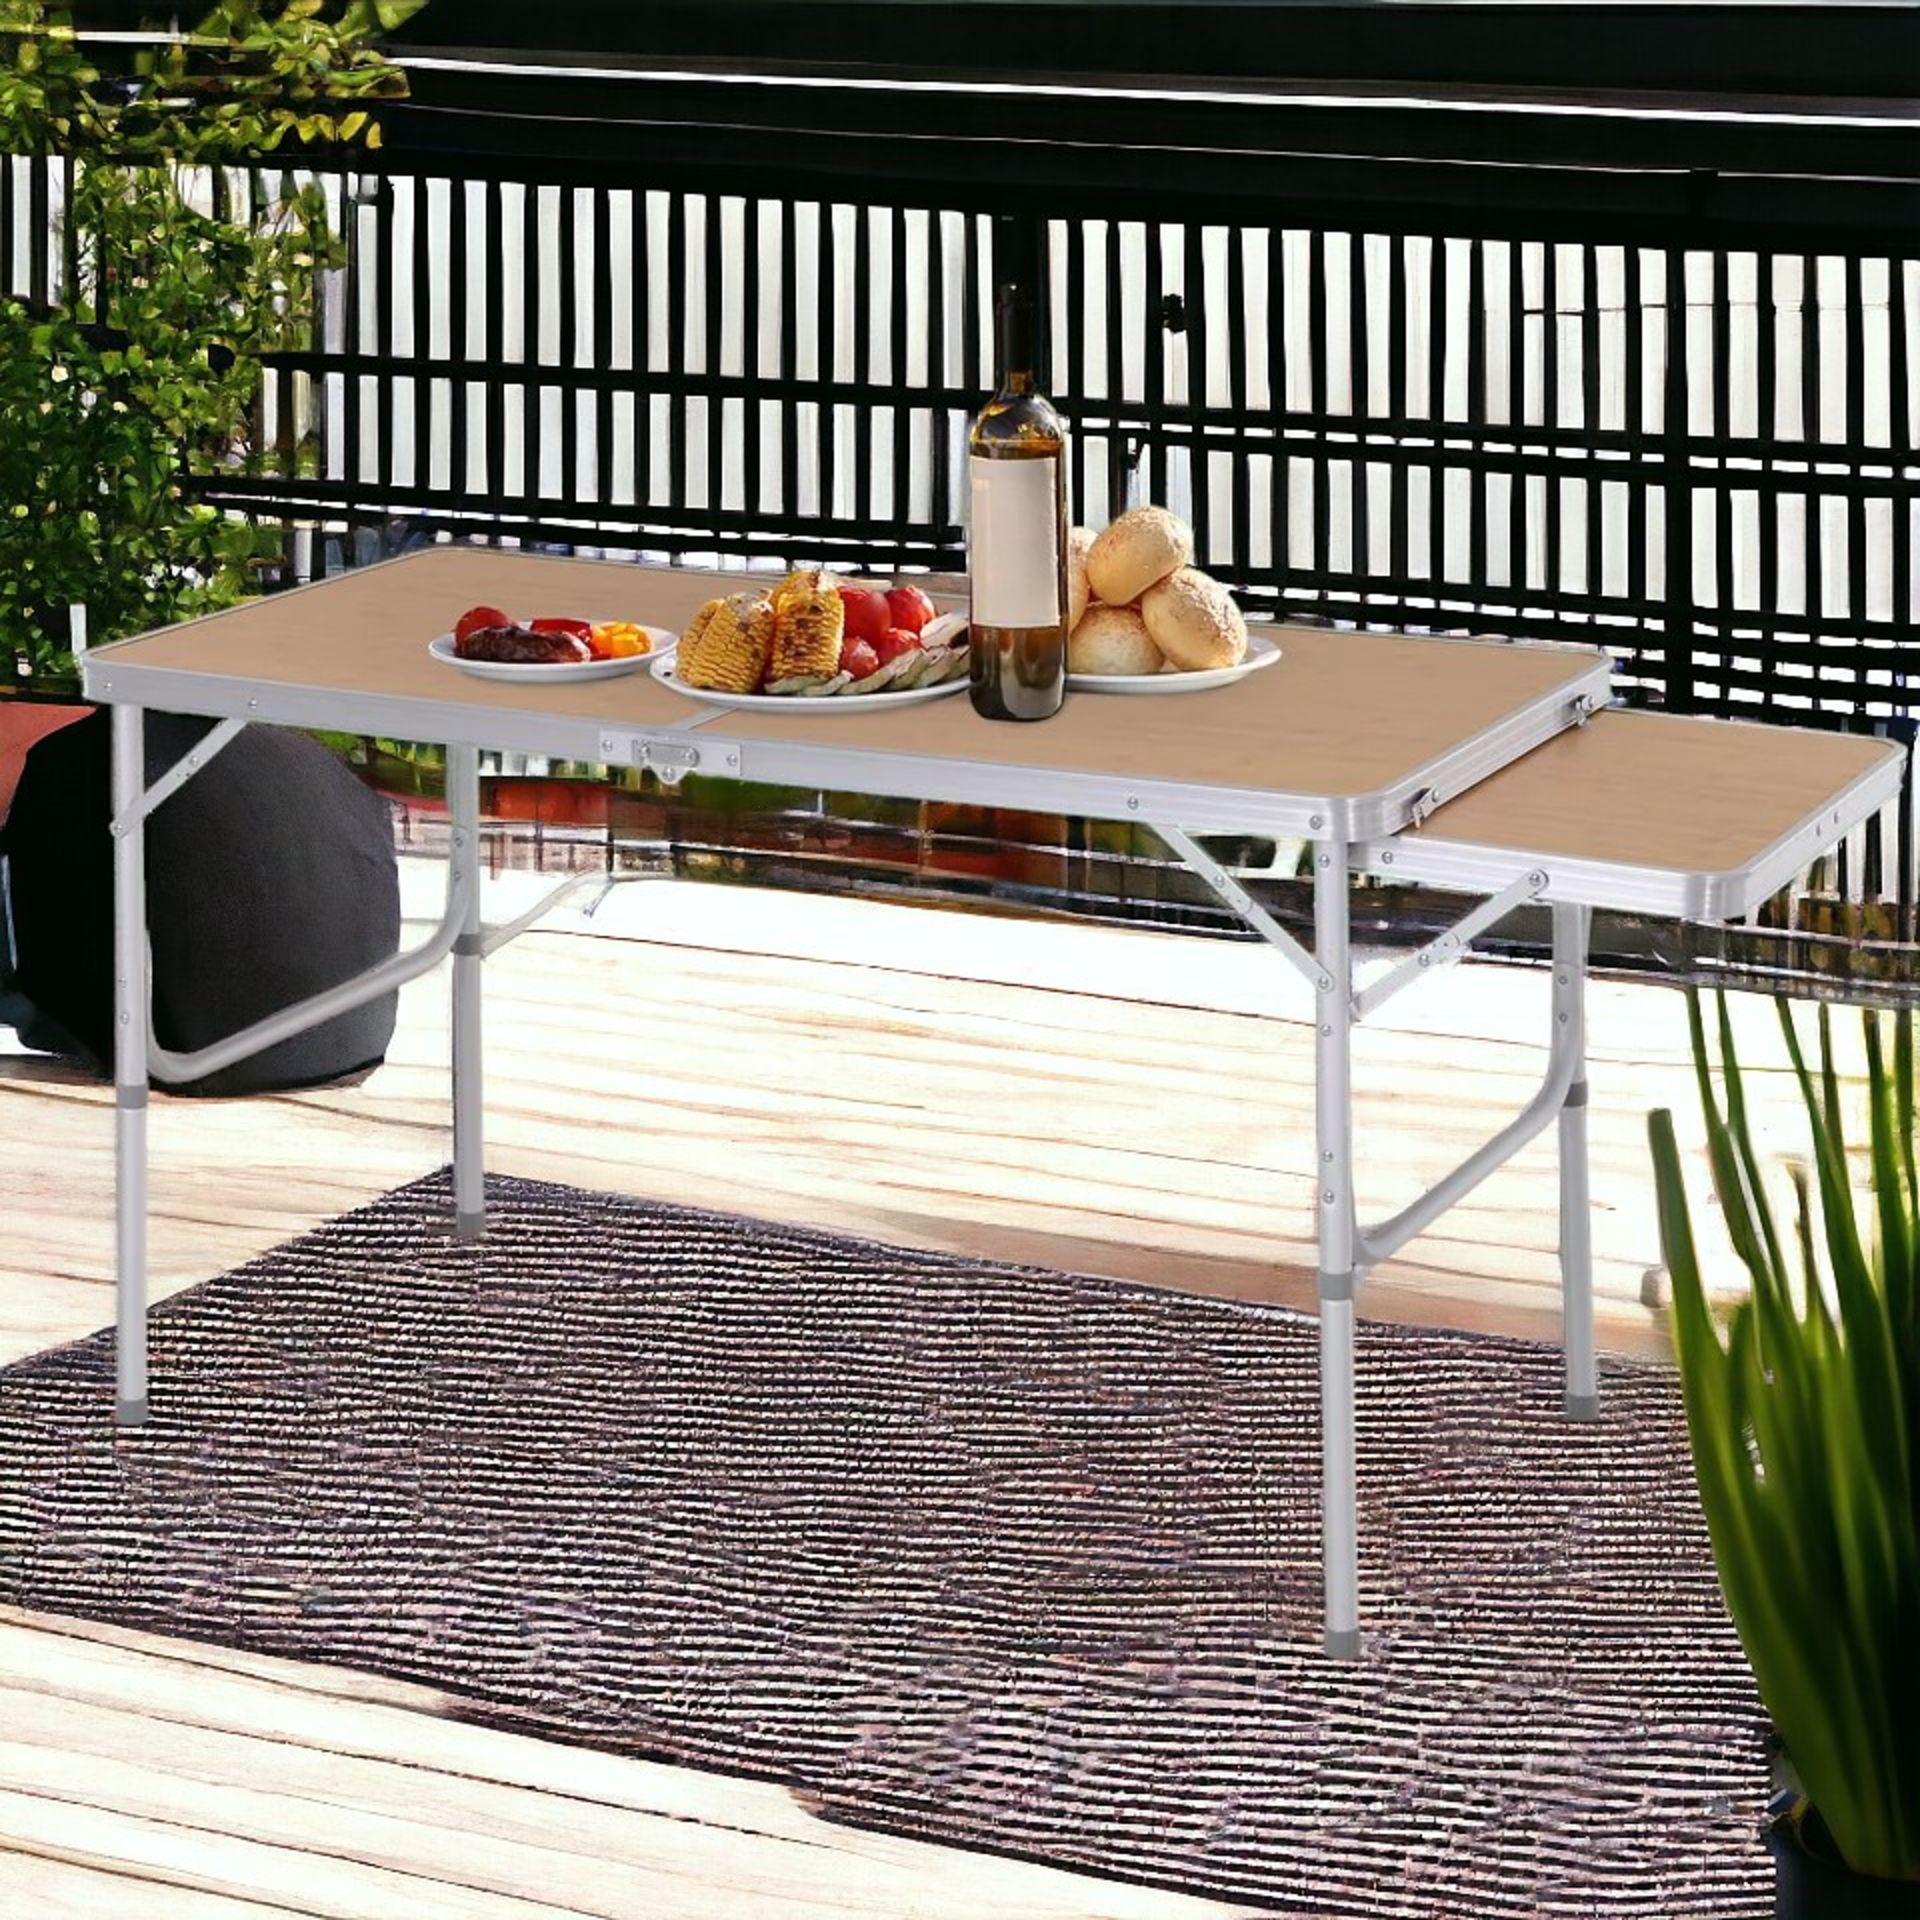 FREE DELIVERY- BRAND NEW 4FT ALUMINIUM PICNIC TABLE W/SIDE DESKTOP OUTDOOR BBQ PARTY - Image 2 of 2